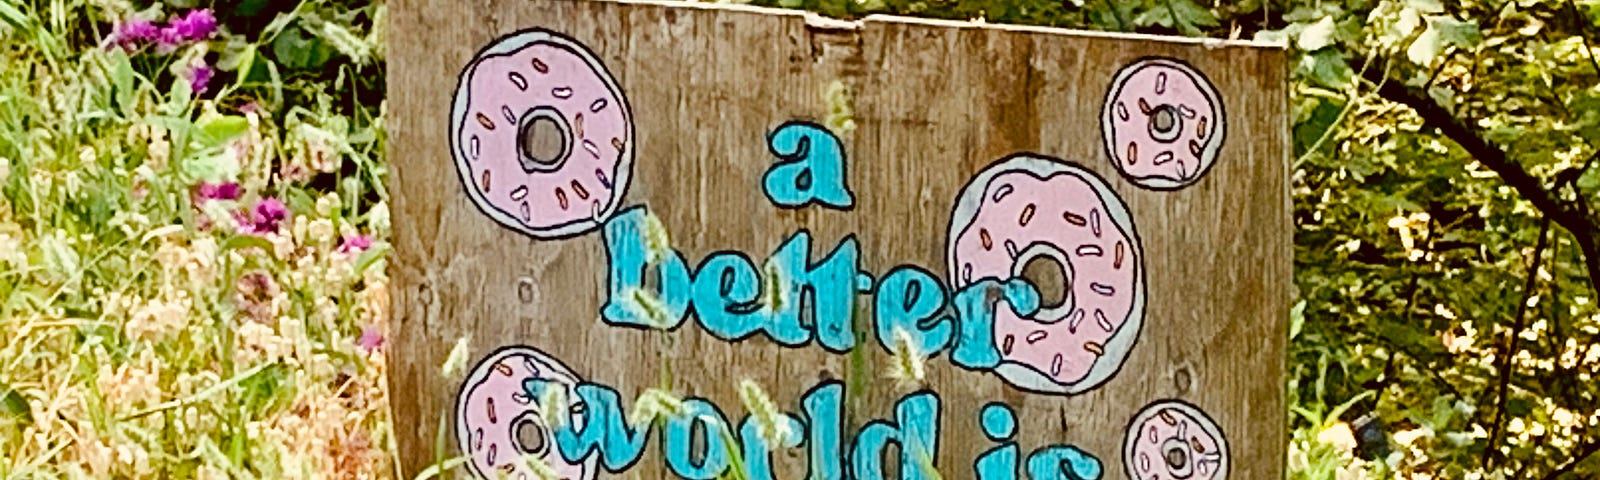 Hand painted plywood sign with donuts and the phrase, “a better world is possible”